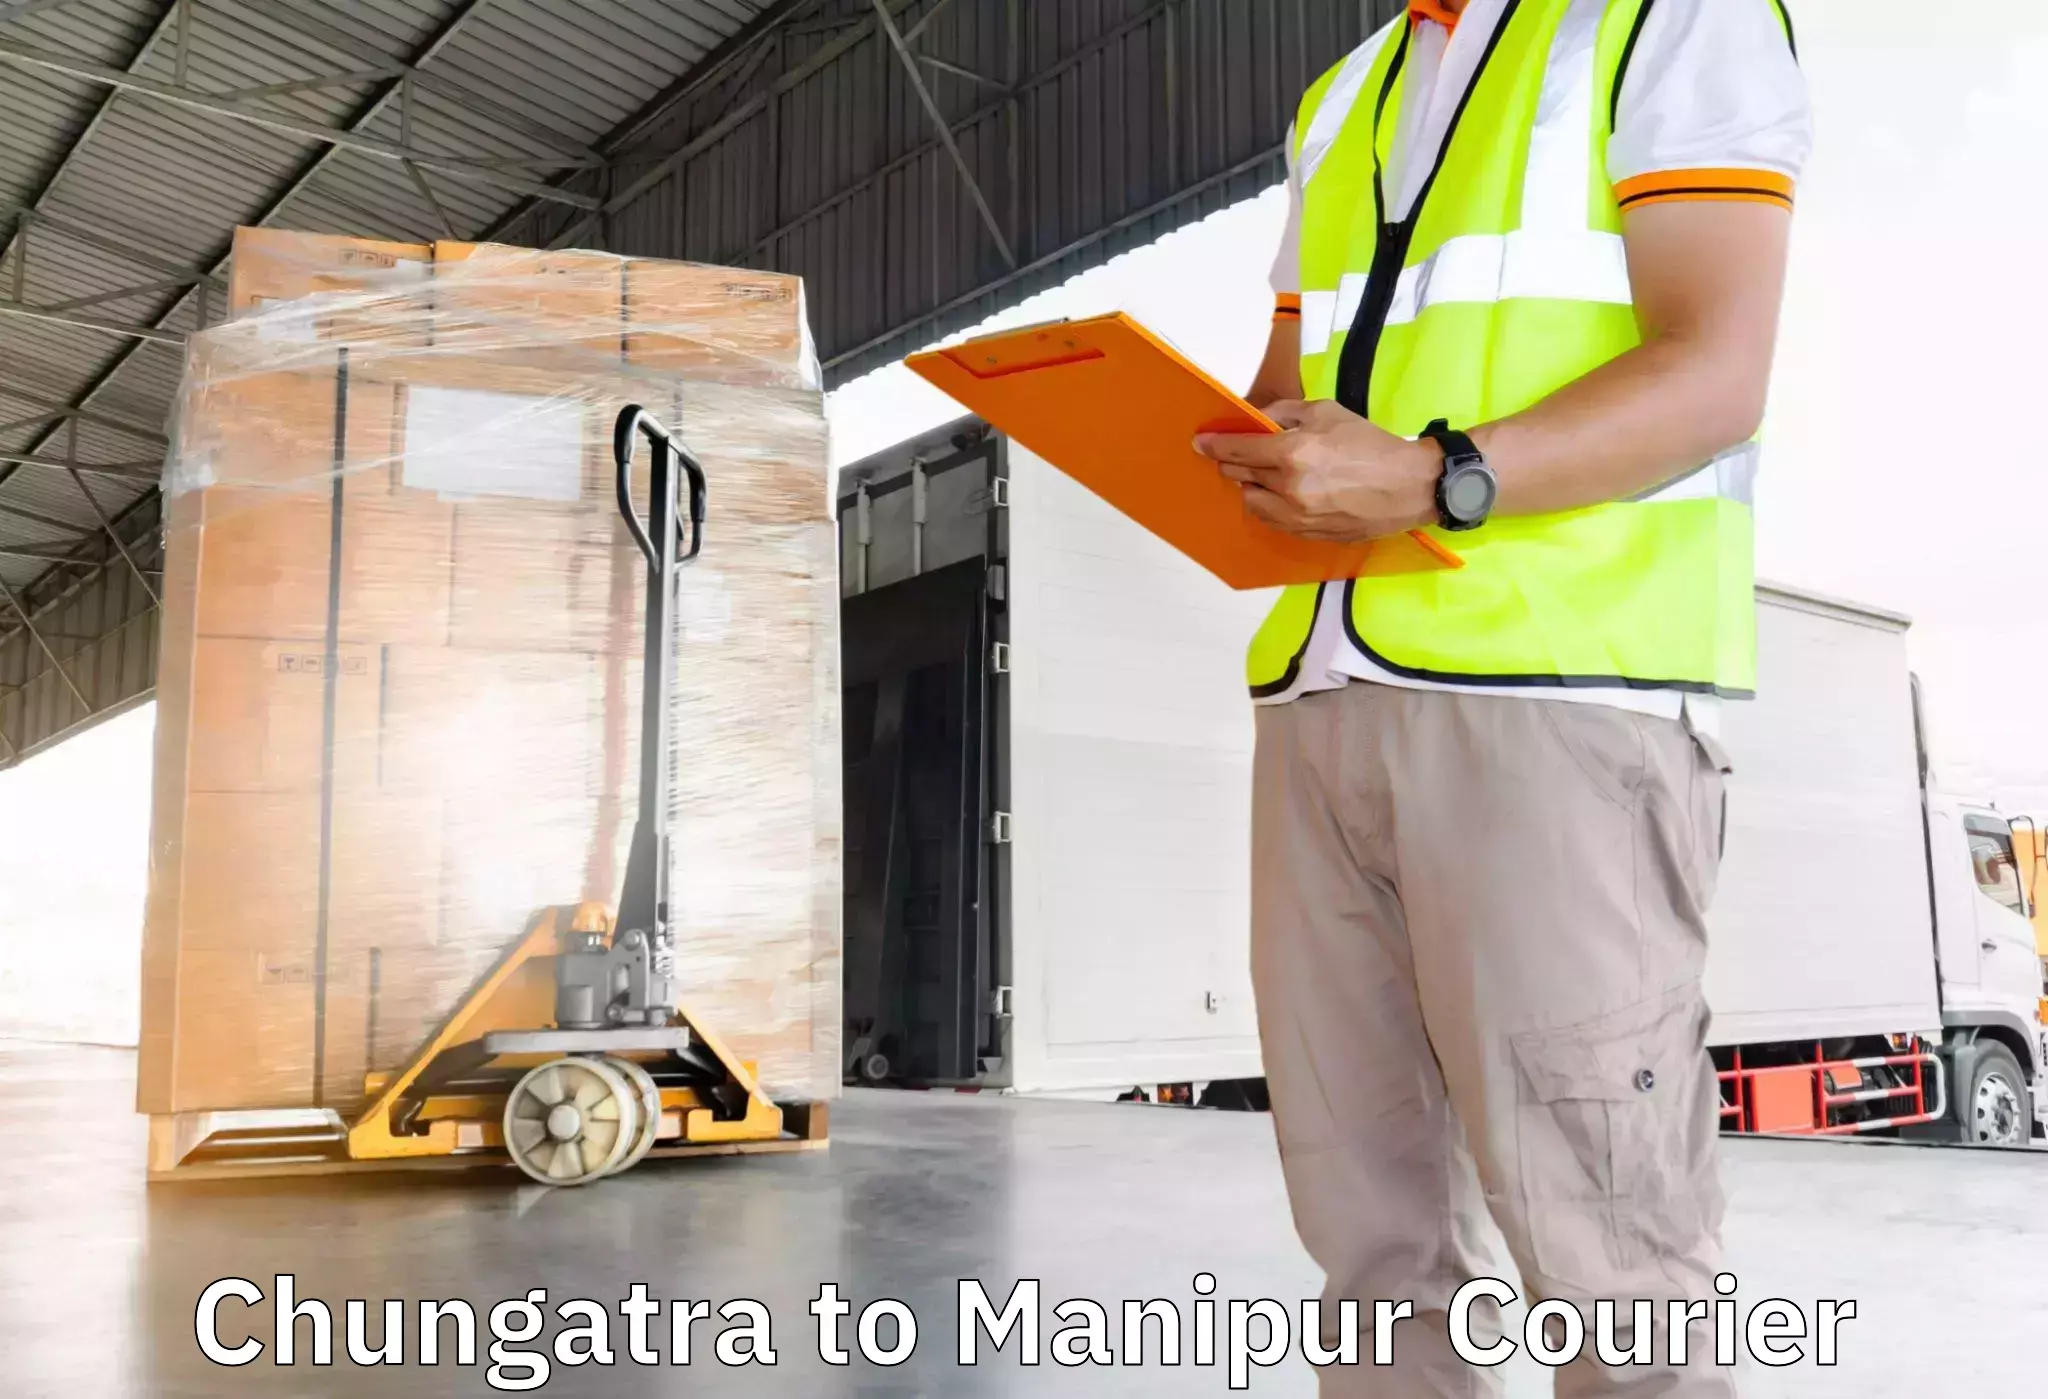 Professional movers and packers Chungatra to Manipur